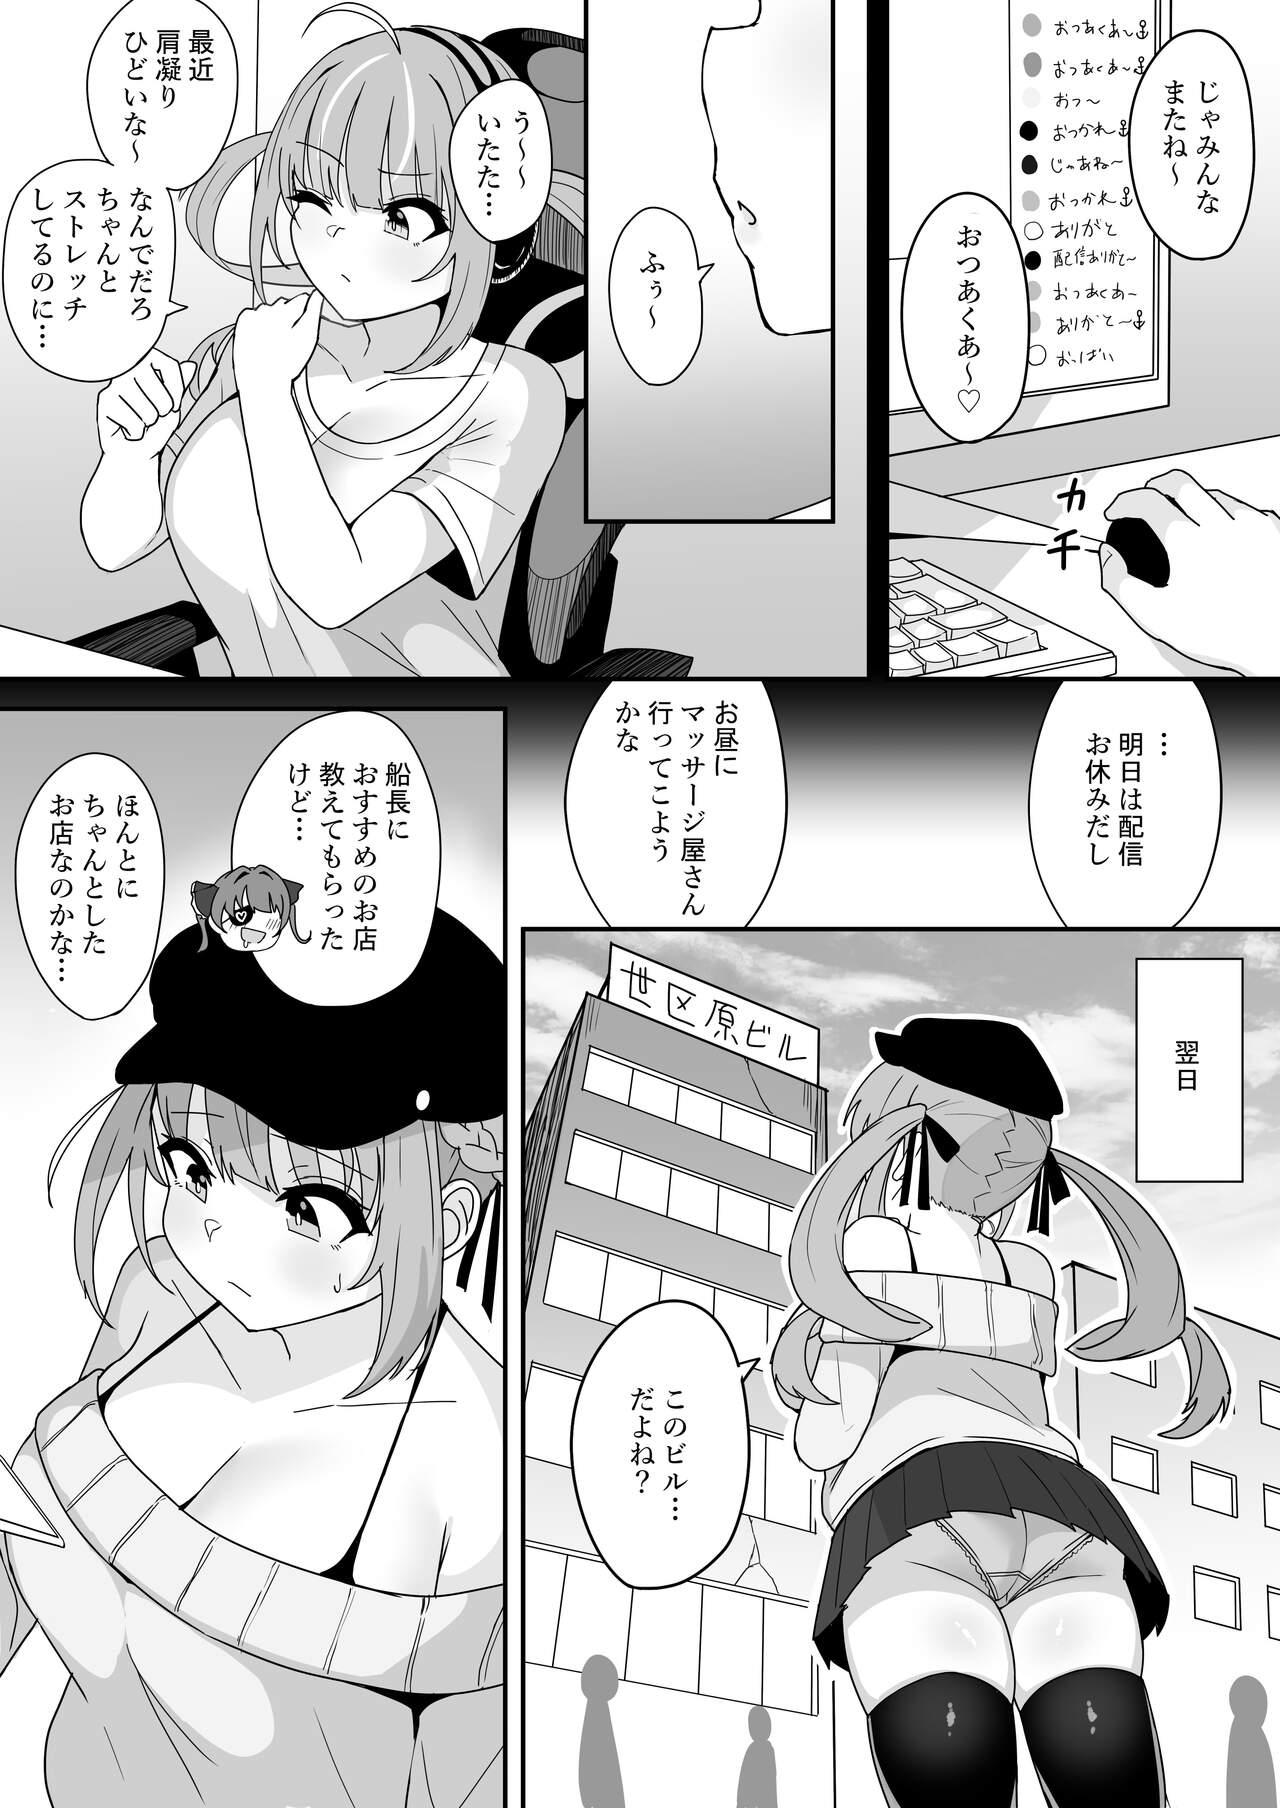 Glory Hole Aqua Gets Sexually Harassed at a Massage Parlor - Hololive Spy Cam - Page 1